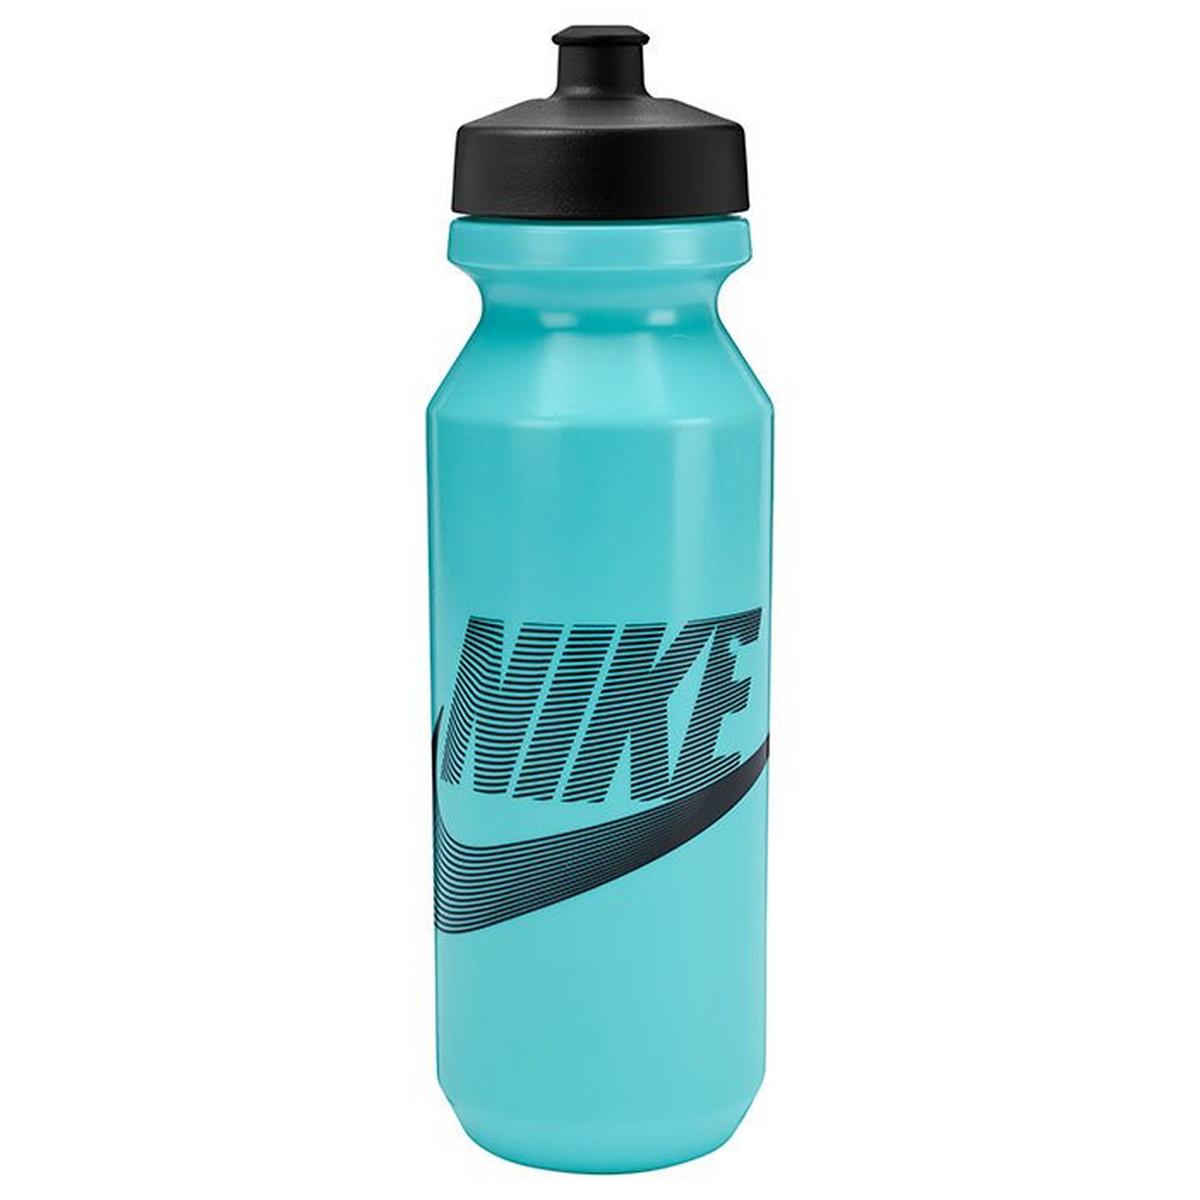 Big Mouth Graphic 2.0 Water Bottle (32 oz)